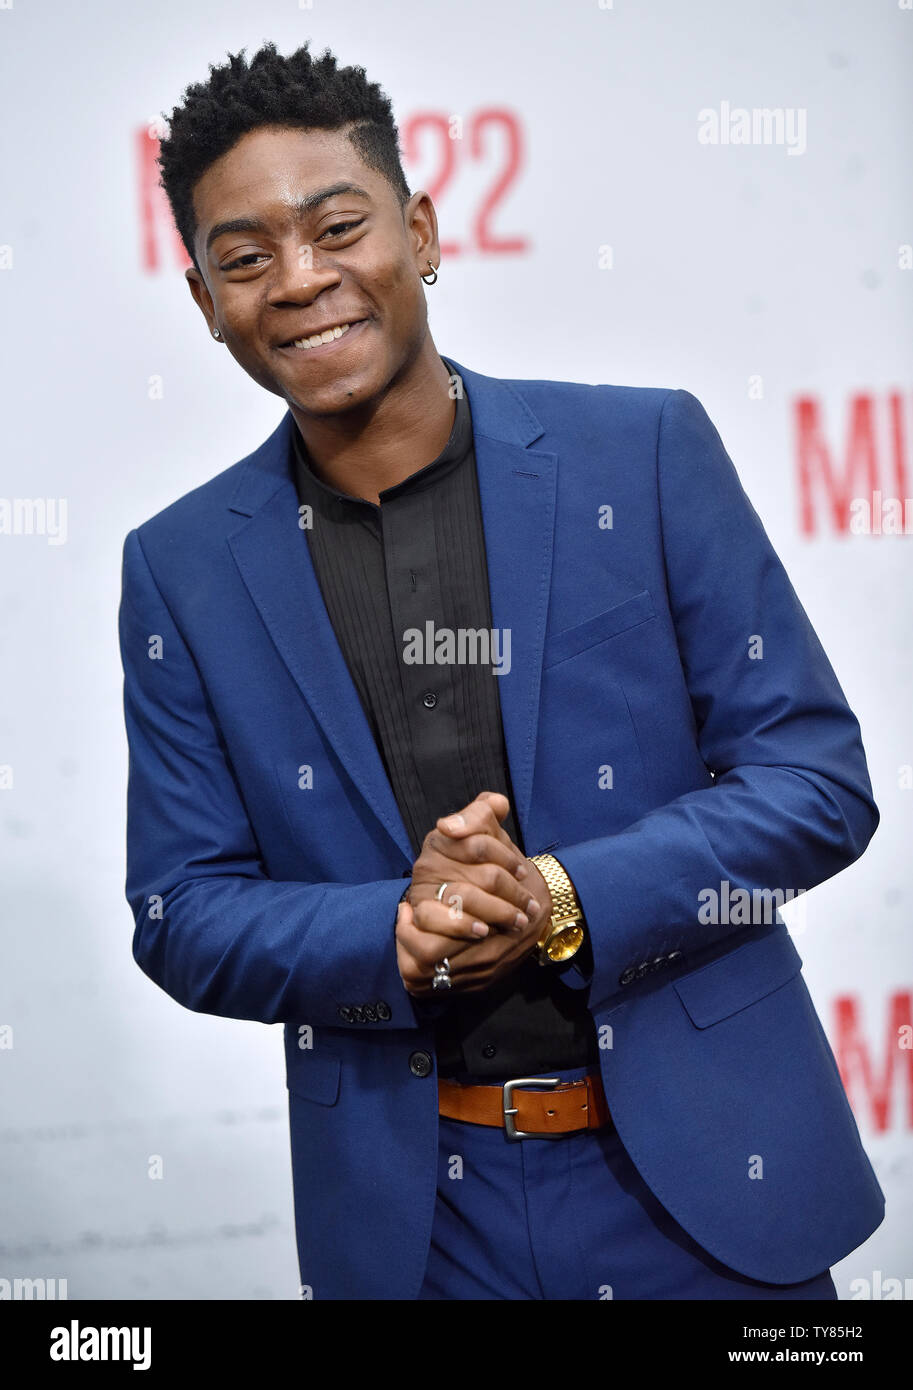 RJ Cyler attends the premiere of 'Mile 22' at the Westwood Village Theater in Los Angeles, California on August 9, 2018. Photo by Chris Chew/UPI Stock Photo